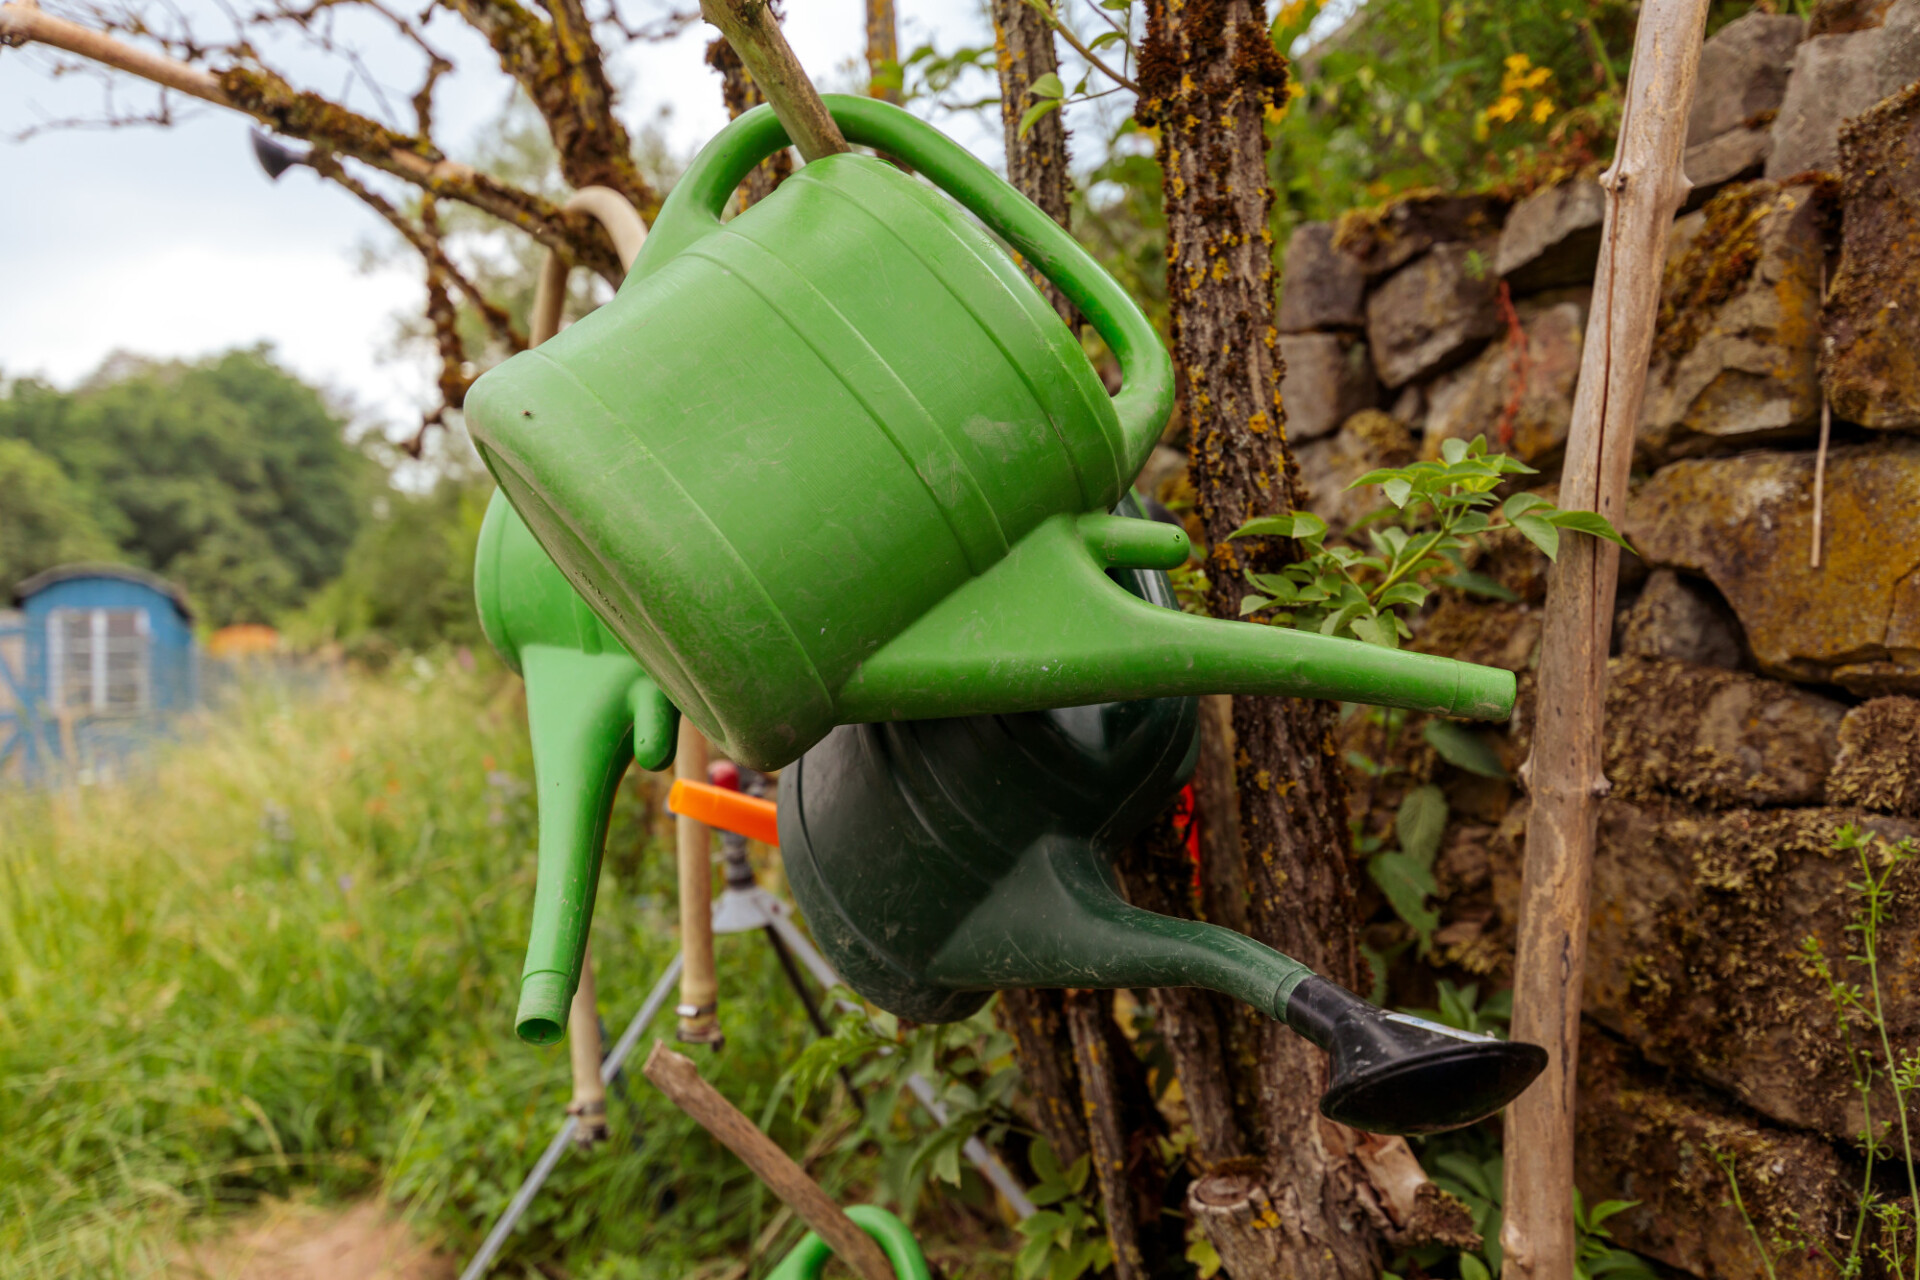 Green watering cans in the garden